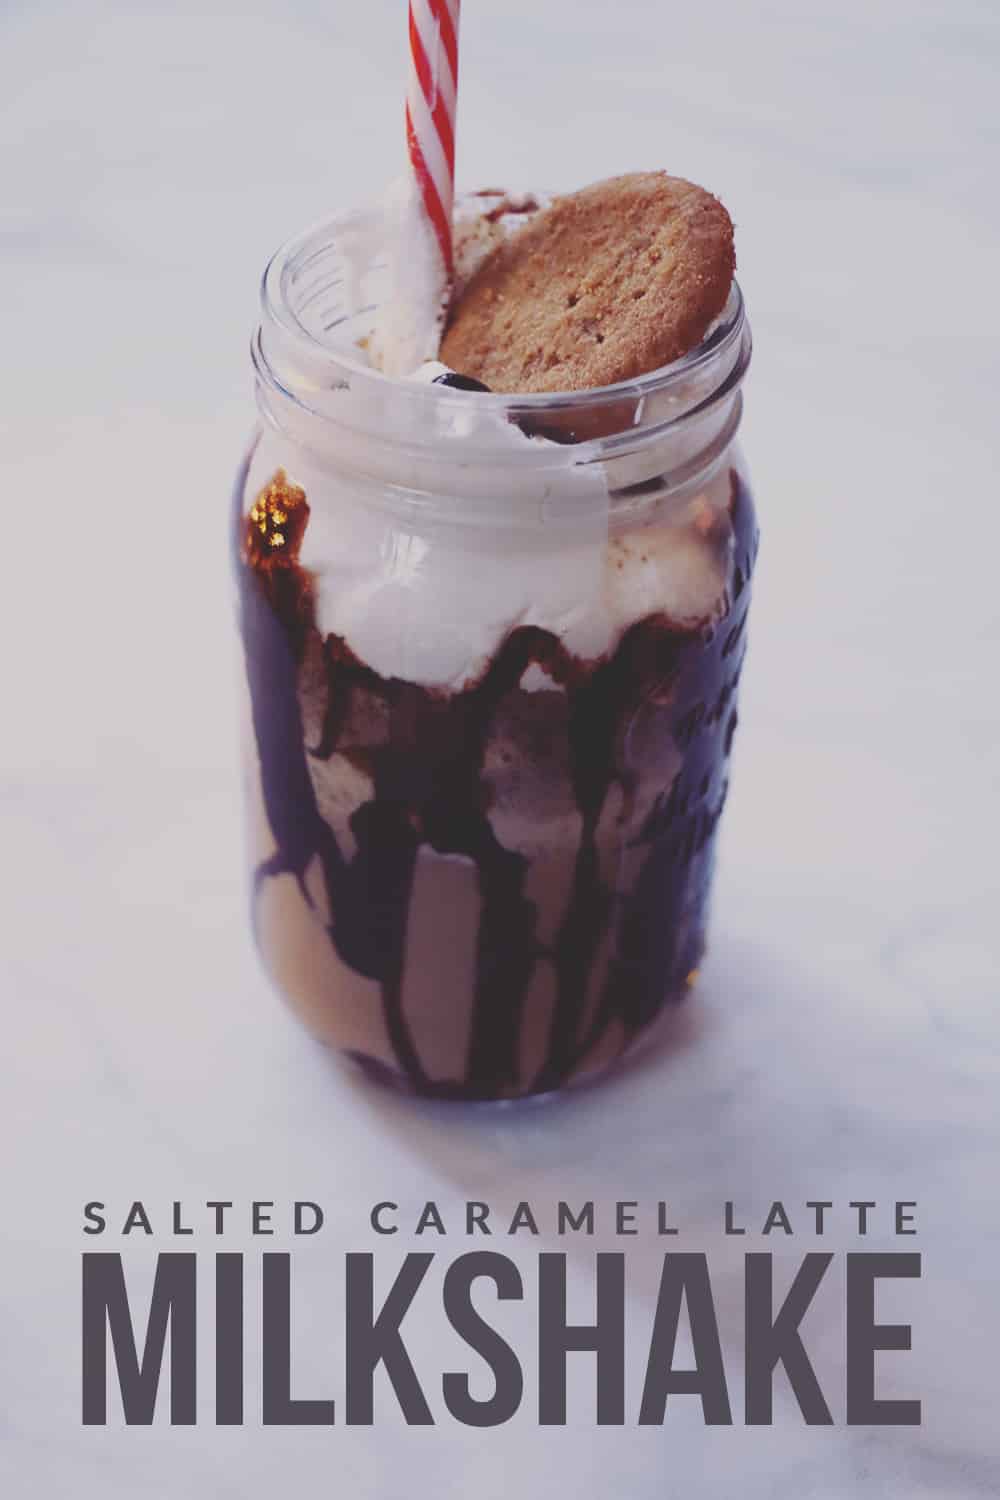 Enjoy one of the best flavors of Fall in this Salted Caramel Latte Milkshake made with frozen yogurt!